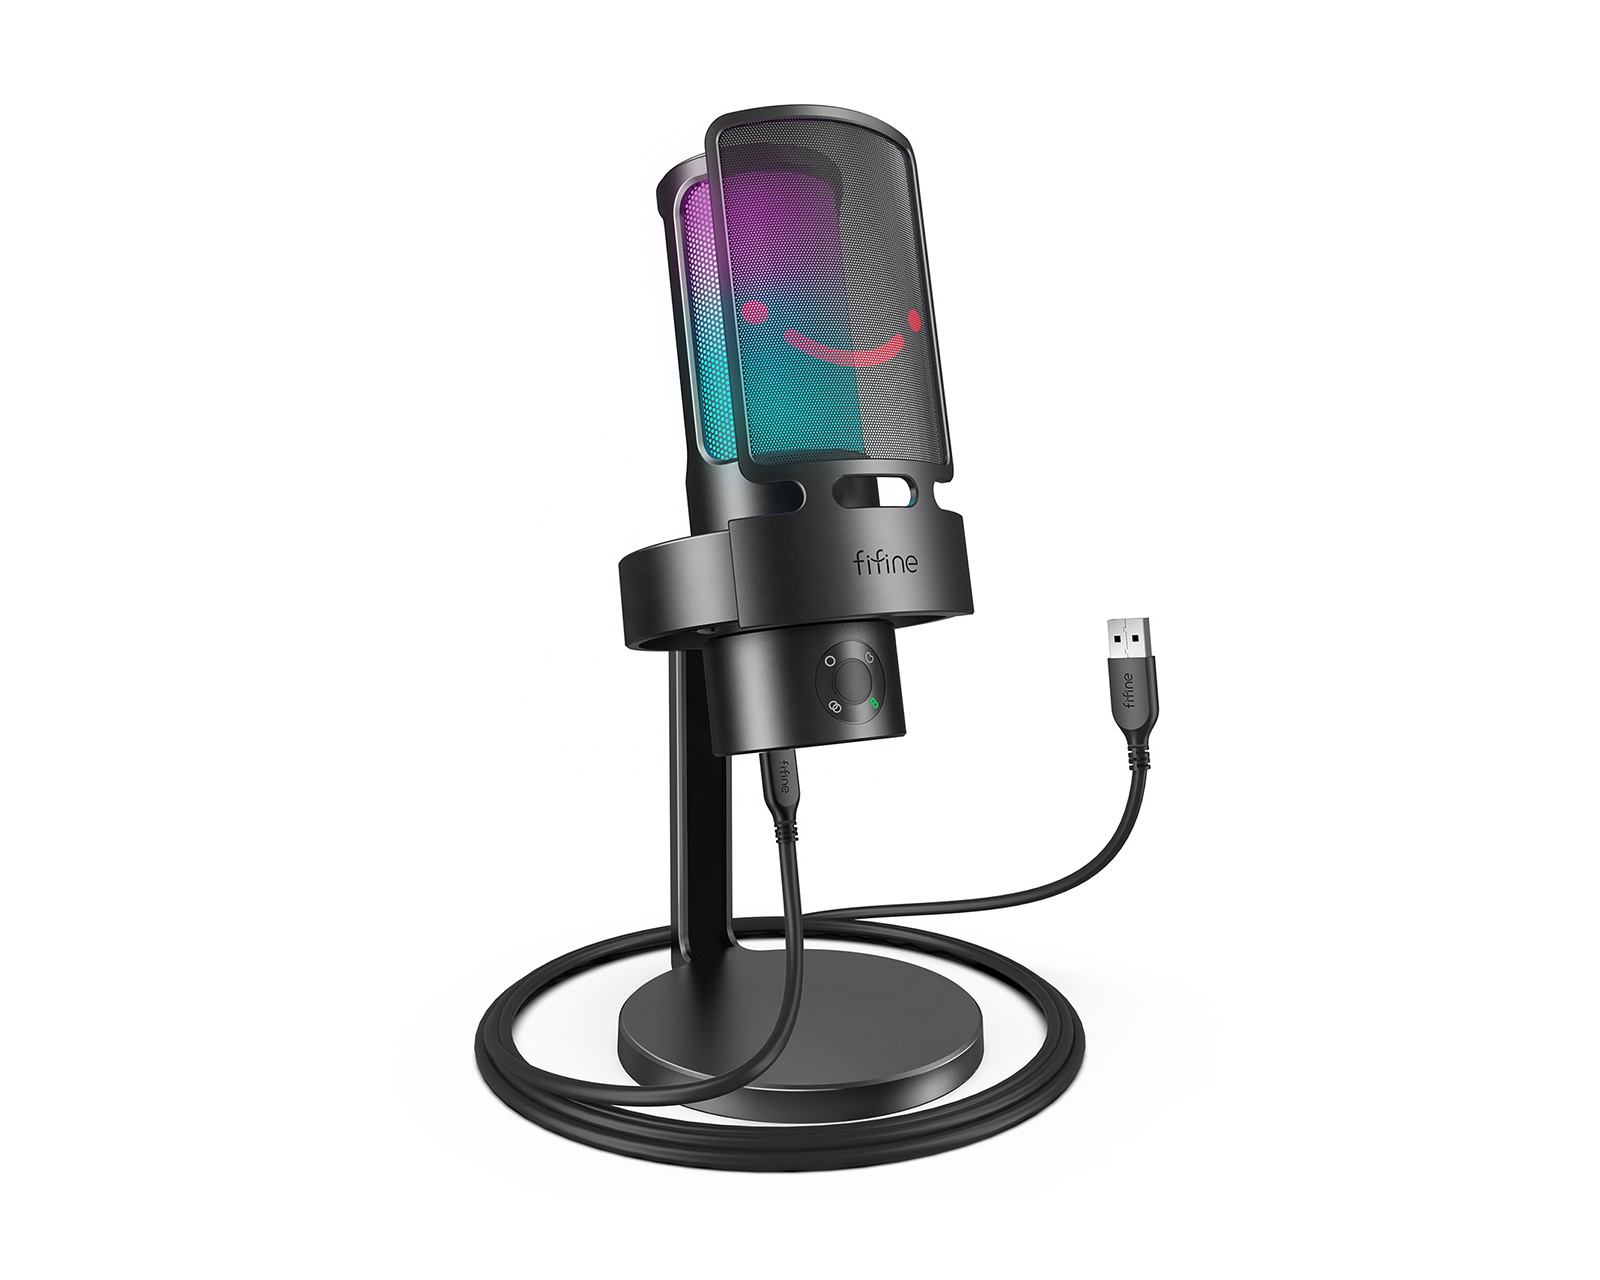 Fifine AMPLIGAME USB Gaming Microphone RGB (PC/PS4/PS5) - Black 